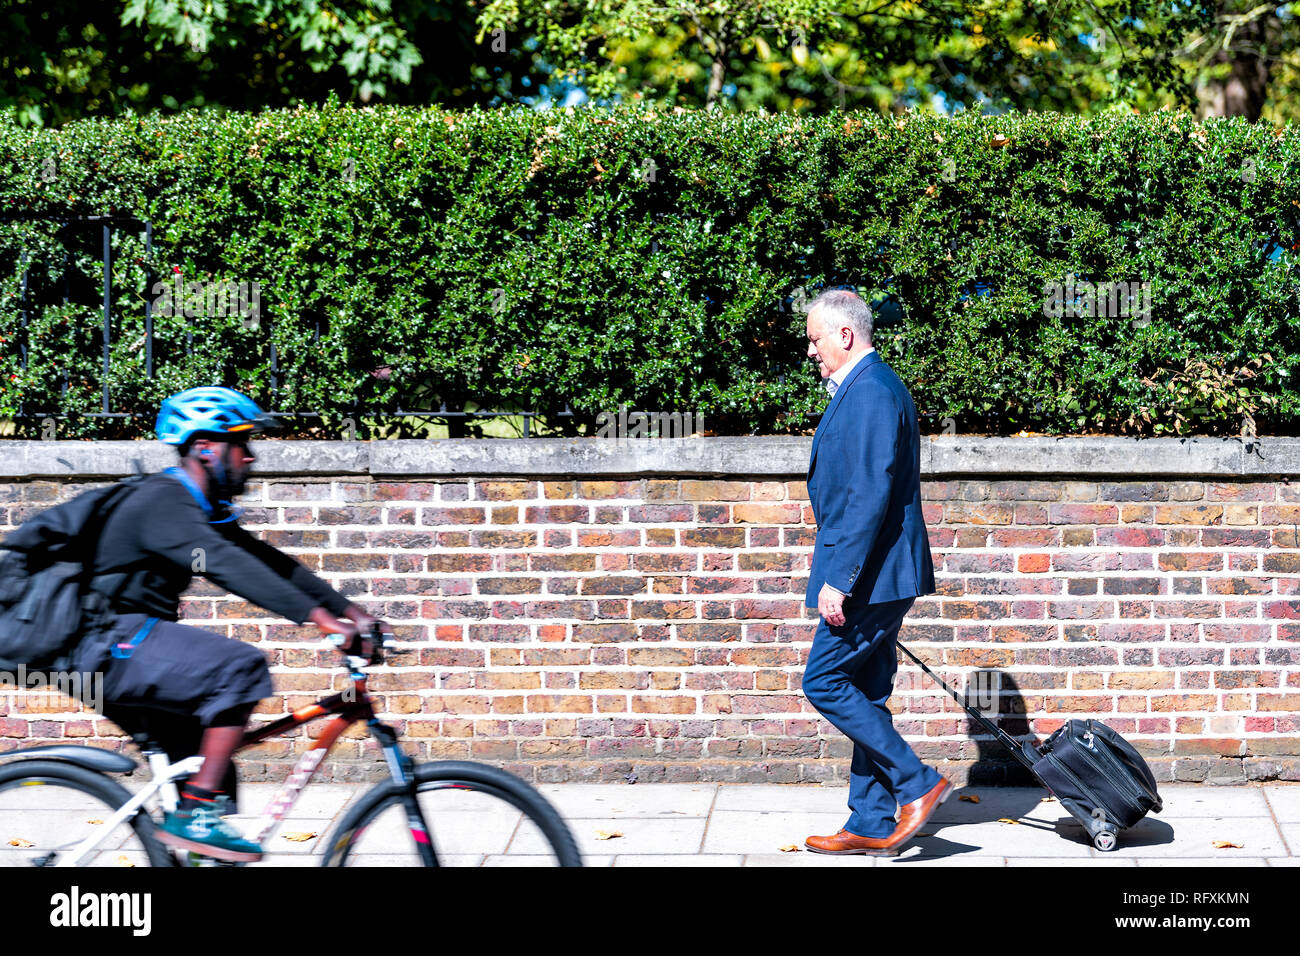 London, UK - September 13, 2018: Street road with one person people man walking with luggage bag pedestrian on sidewalk businessman commute in Kensing Stock Photo